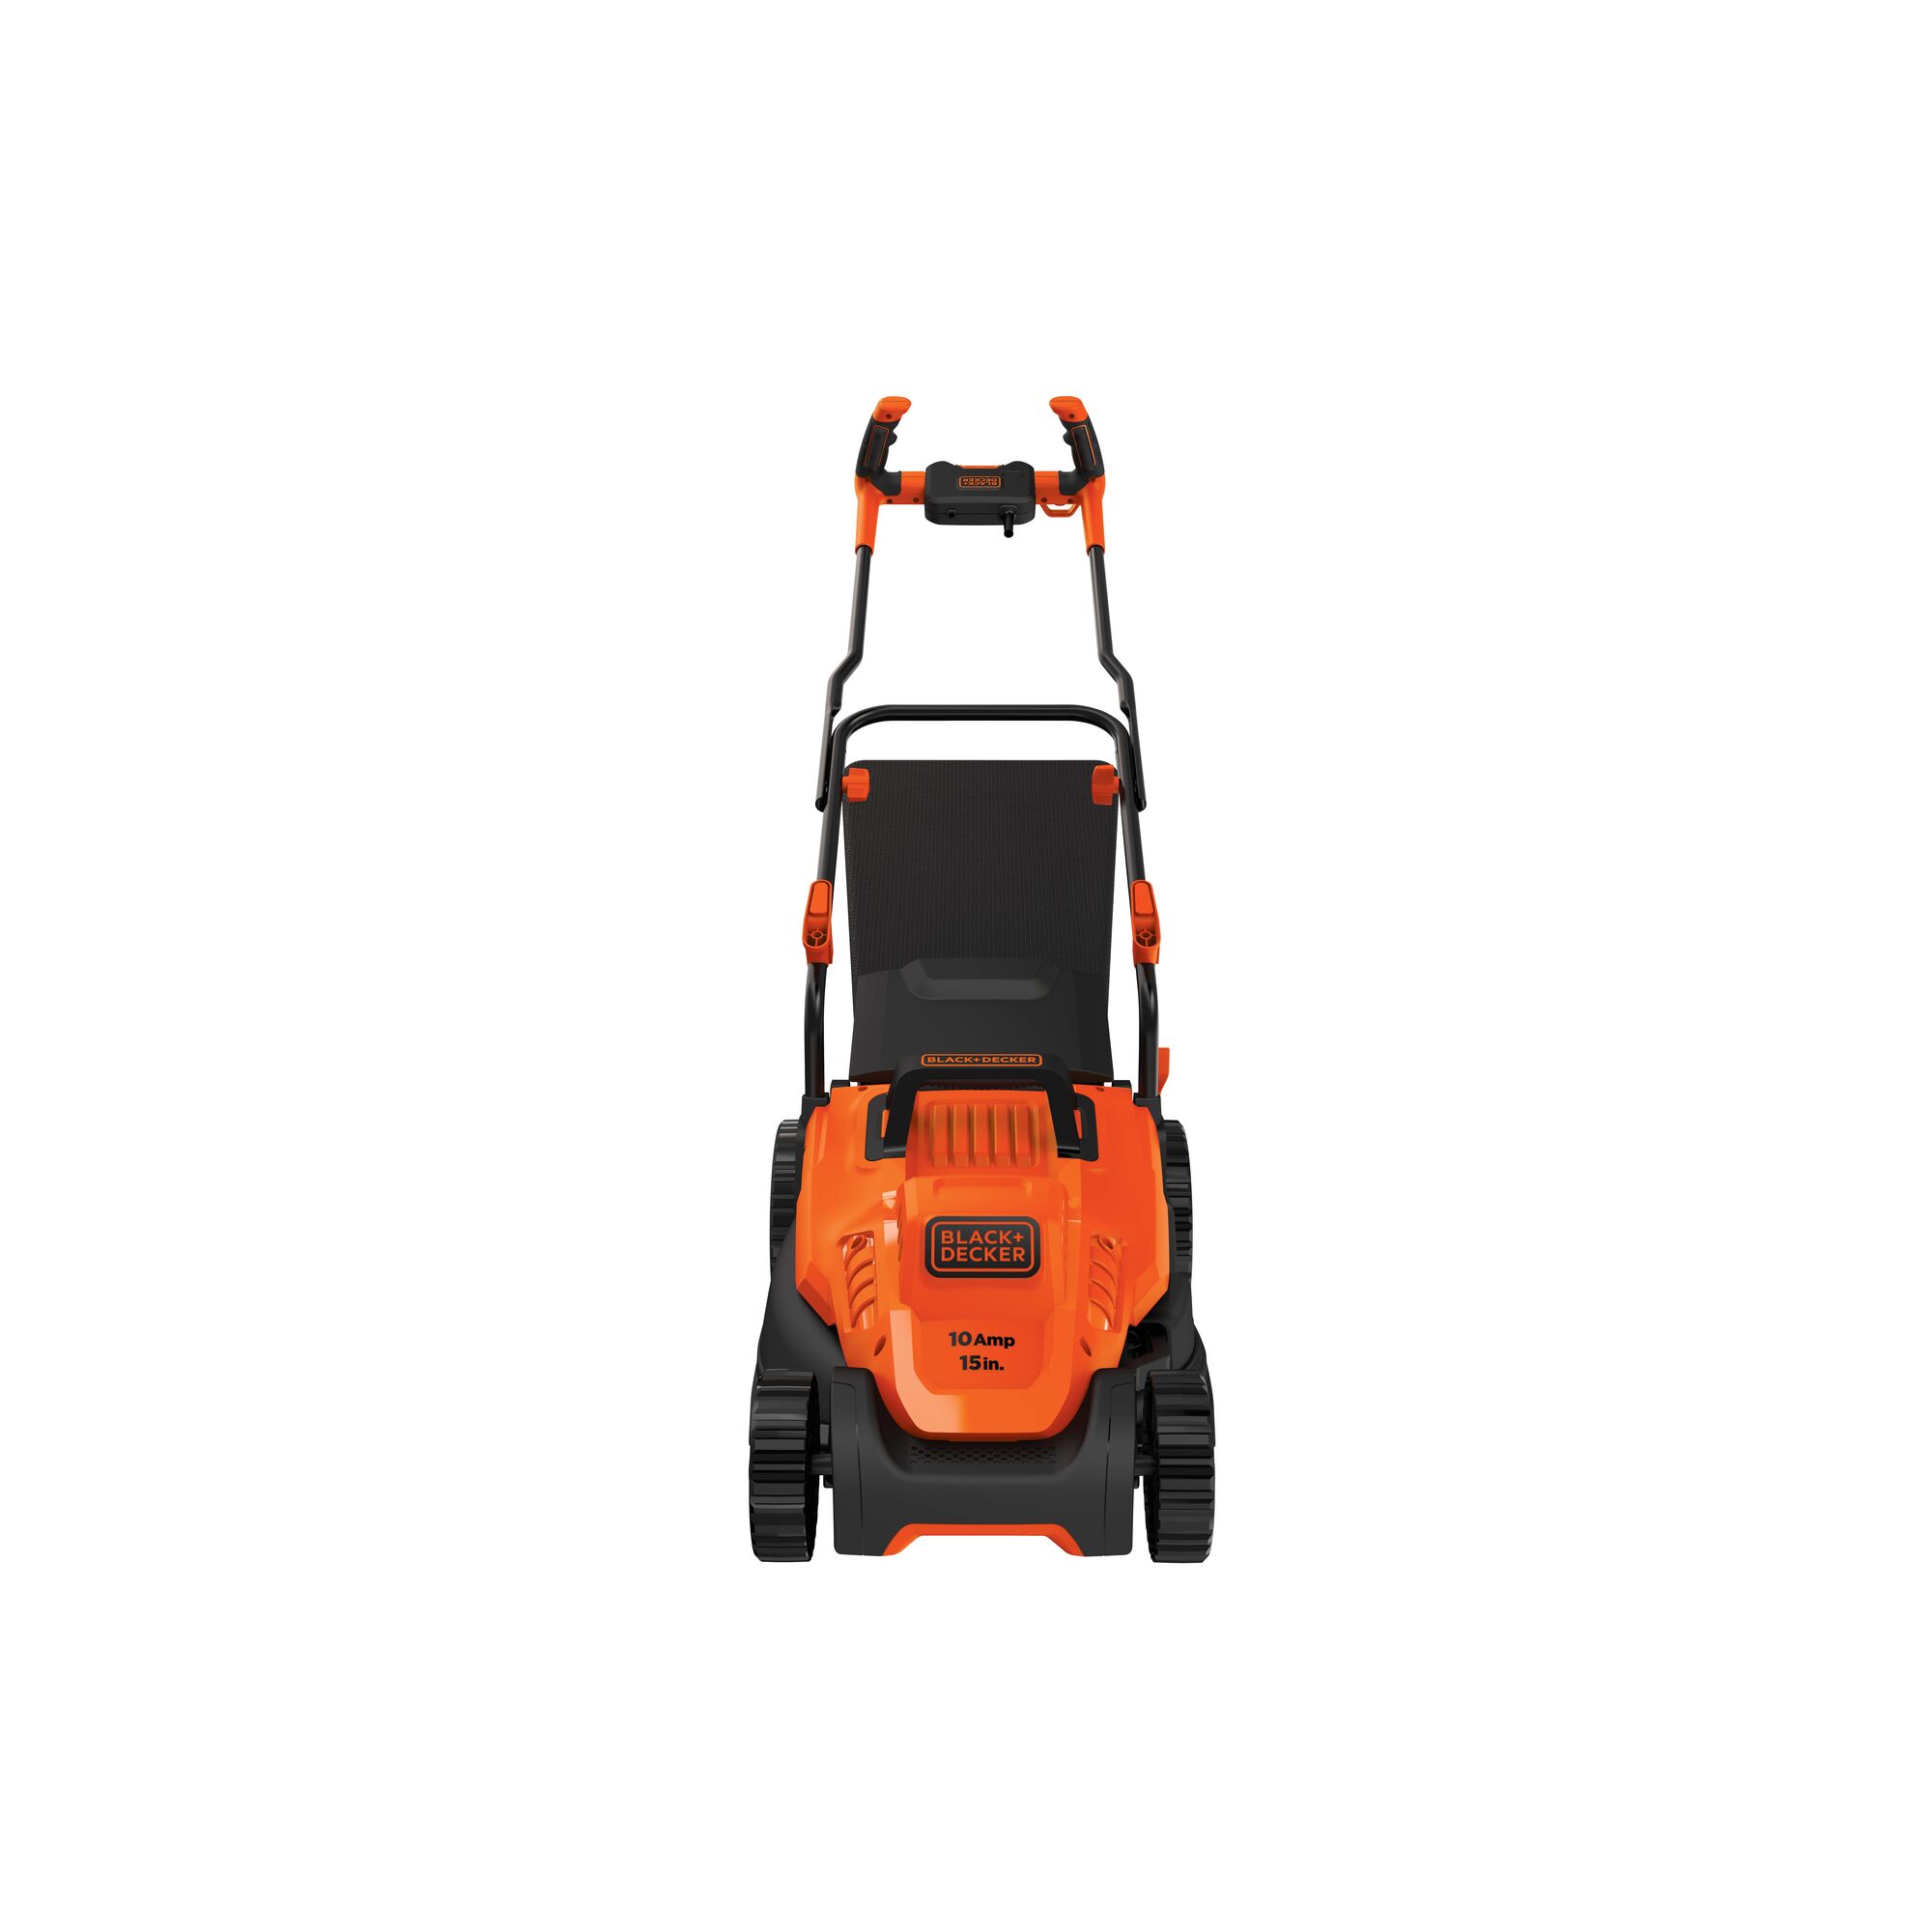 Profile of 10 amp 15 inch electric lawn mower with comfort grip handle.